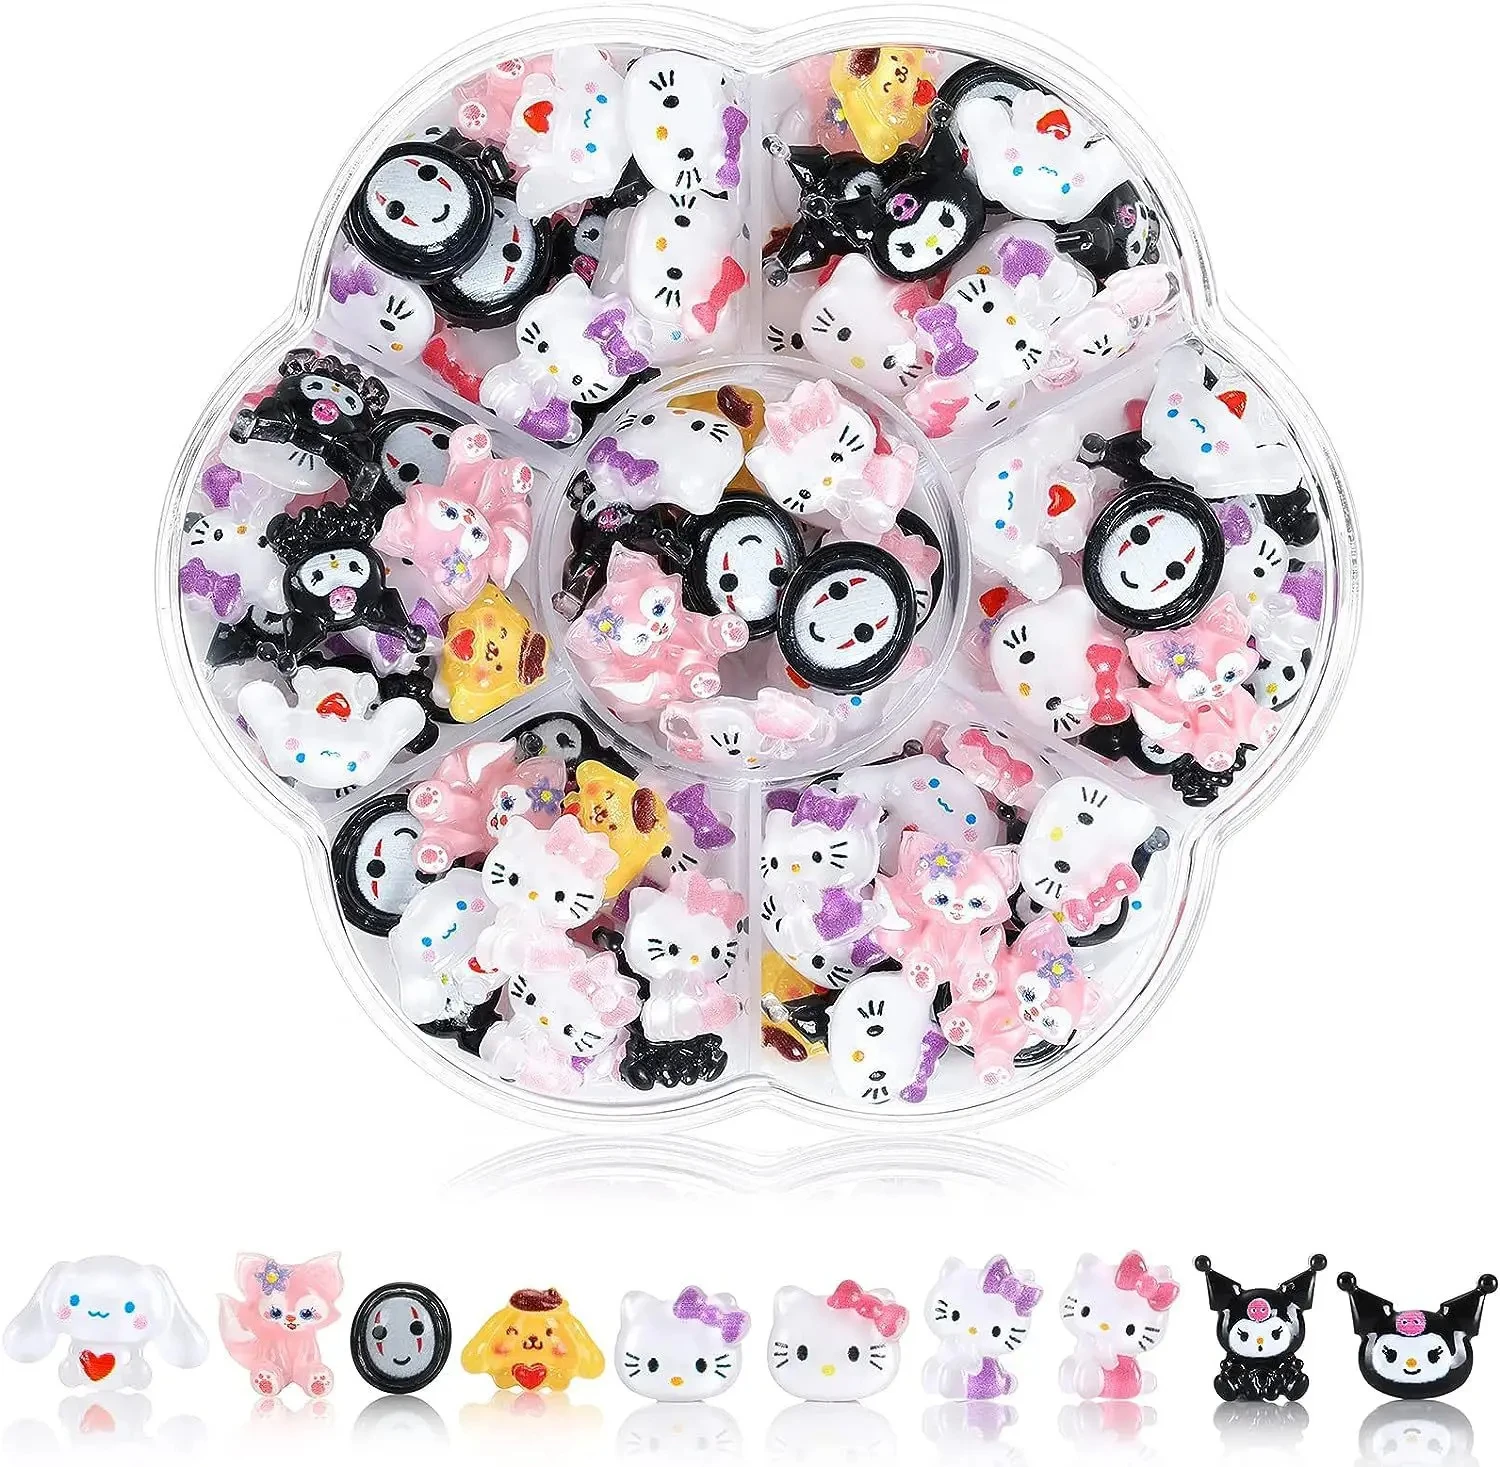 70Pcs/box Sanrio Fake Nail Jewelry Set Cartoon Hello Kitty Cinnamoroll Mymelody Diy Anime Accessories Charms Gems Kit Diy Crafts 1pcs uv resin jewelry liquid silicone mold 3d elk deer head cartoon resin charms molds for diy pendant decorate making jewelry